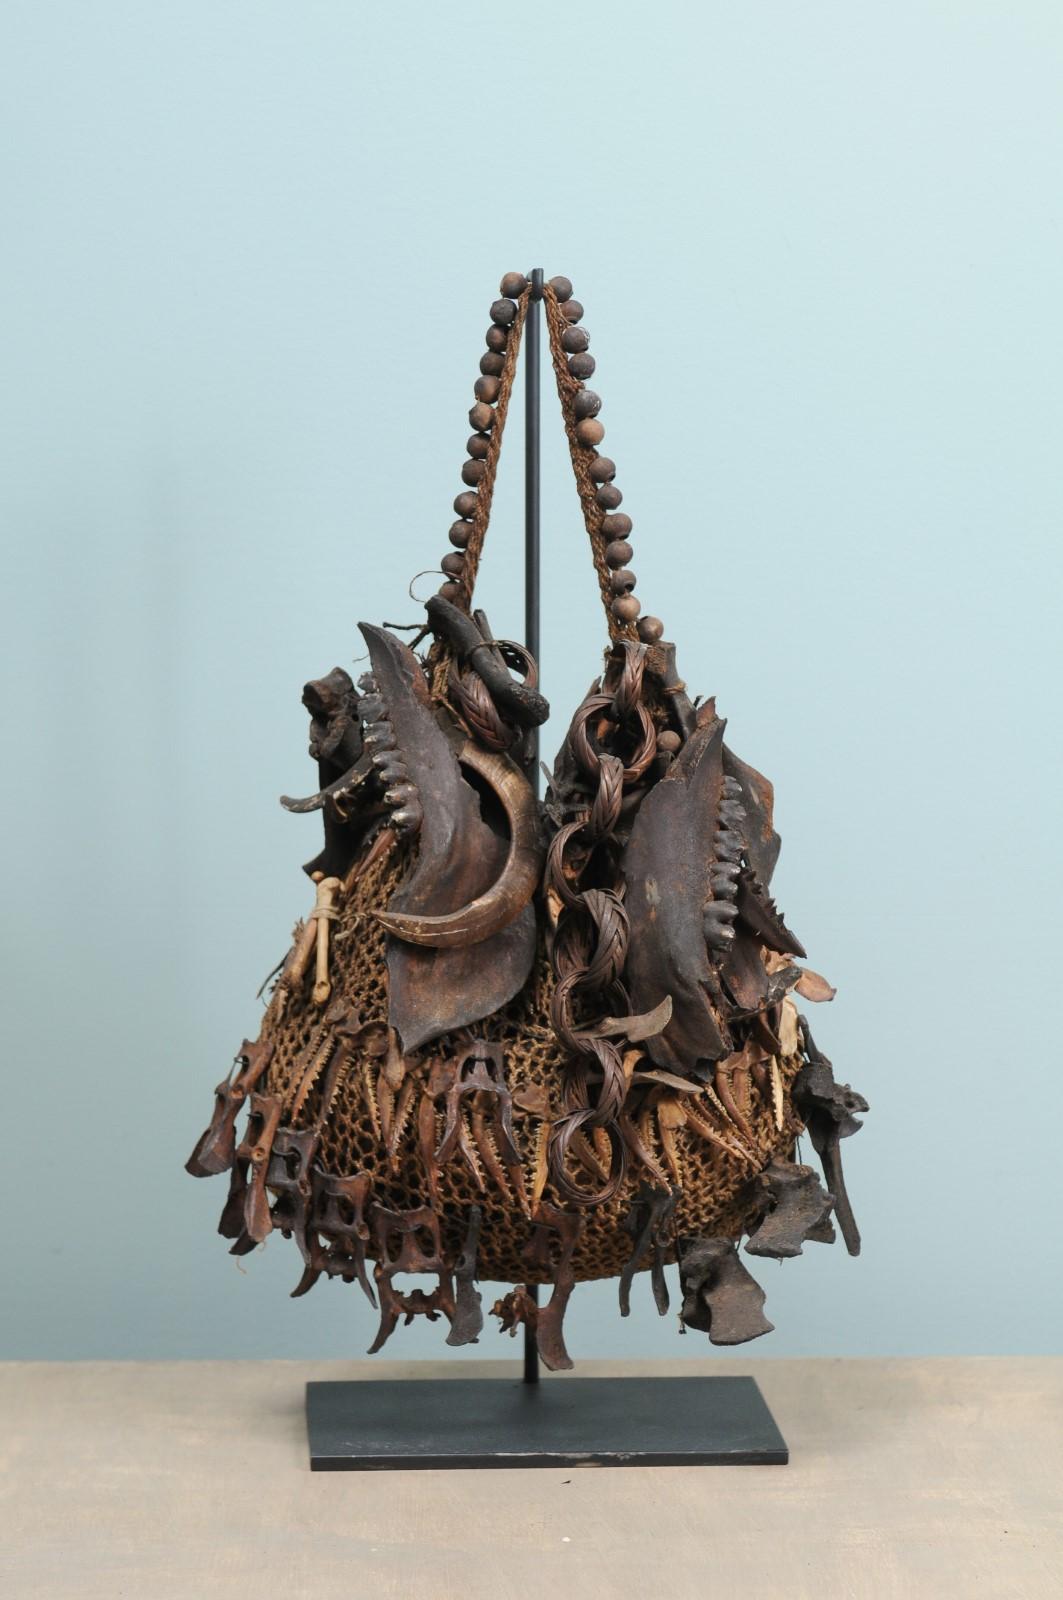 A single Papua New Guinea medicine bag from the mid-20th century on custom stand. This woven medicine bag from East Highlands Papua New Guinea features a nicely beaded handle strap, and is adorn with a collection of bones (some intricately carved),